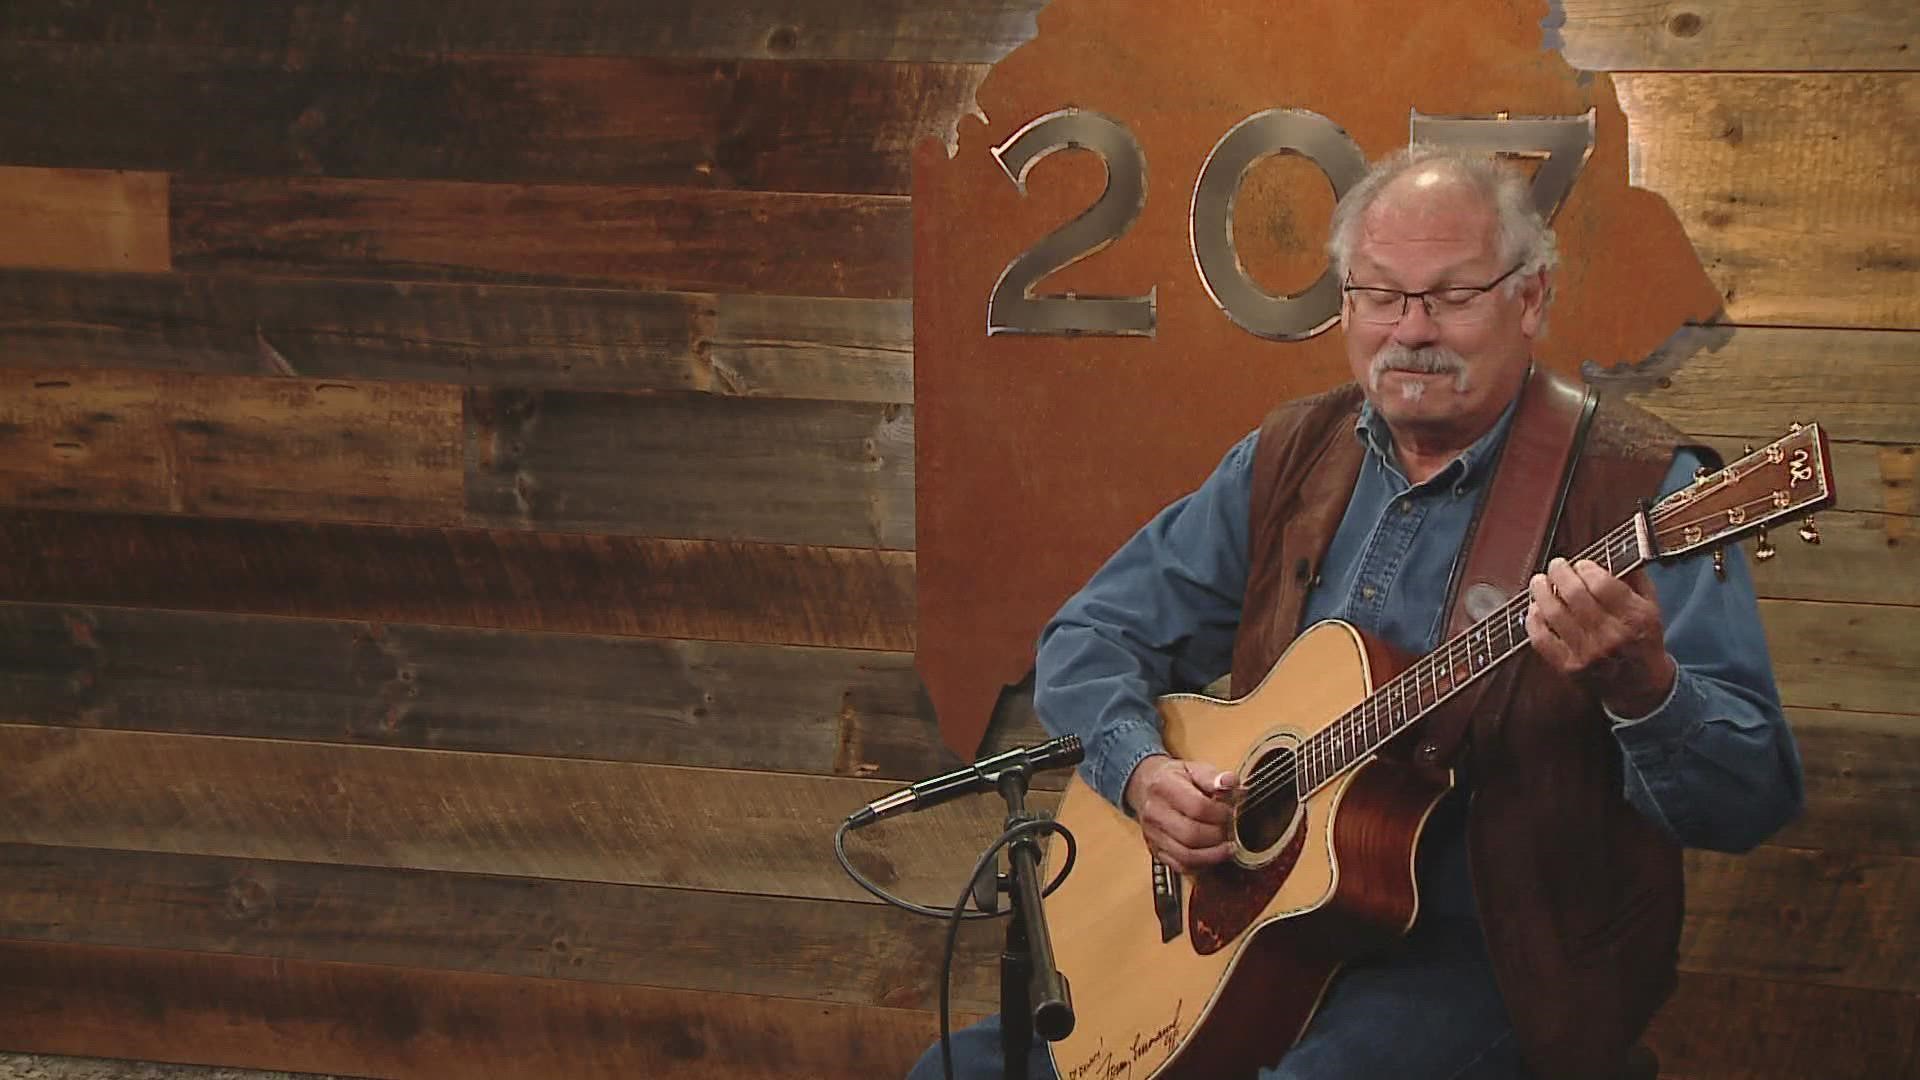 Breau joined 207 to talk about his new CD and perform some original music.